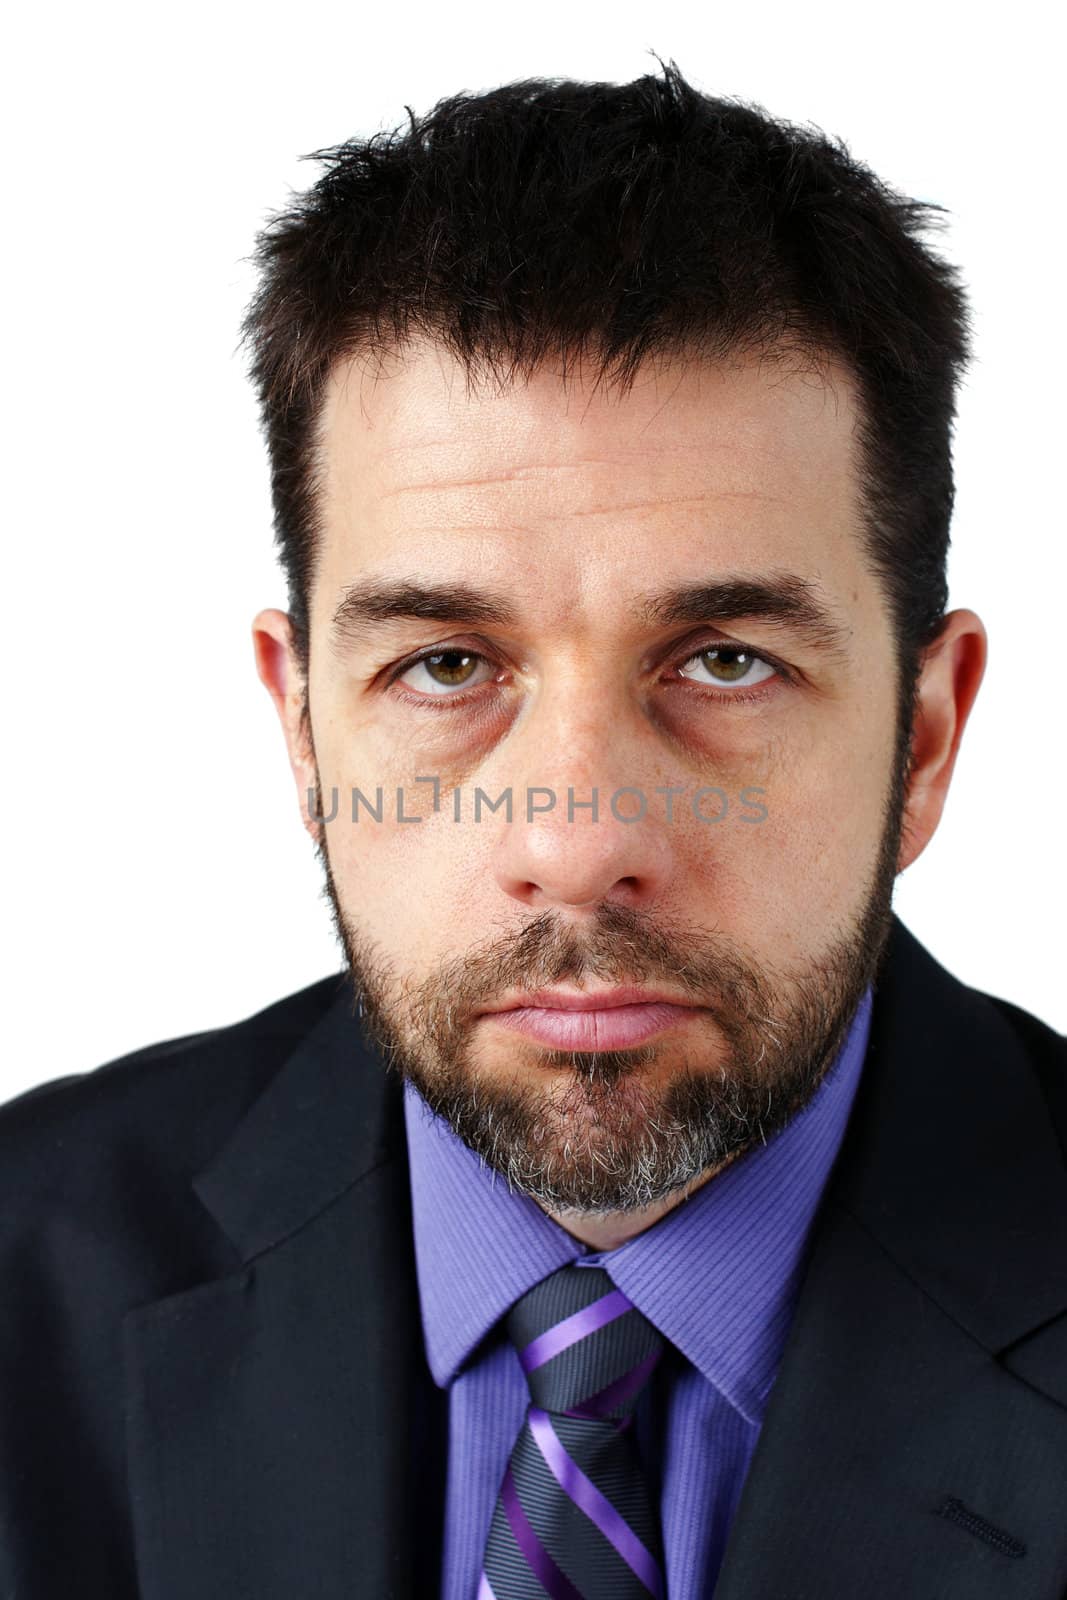 Portrait of unhappy man in suit by Mirage3